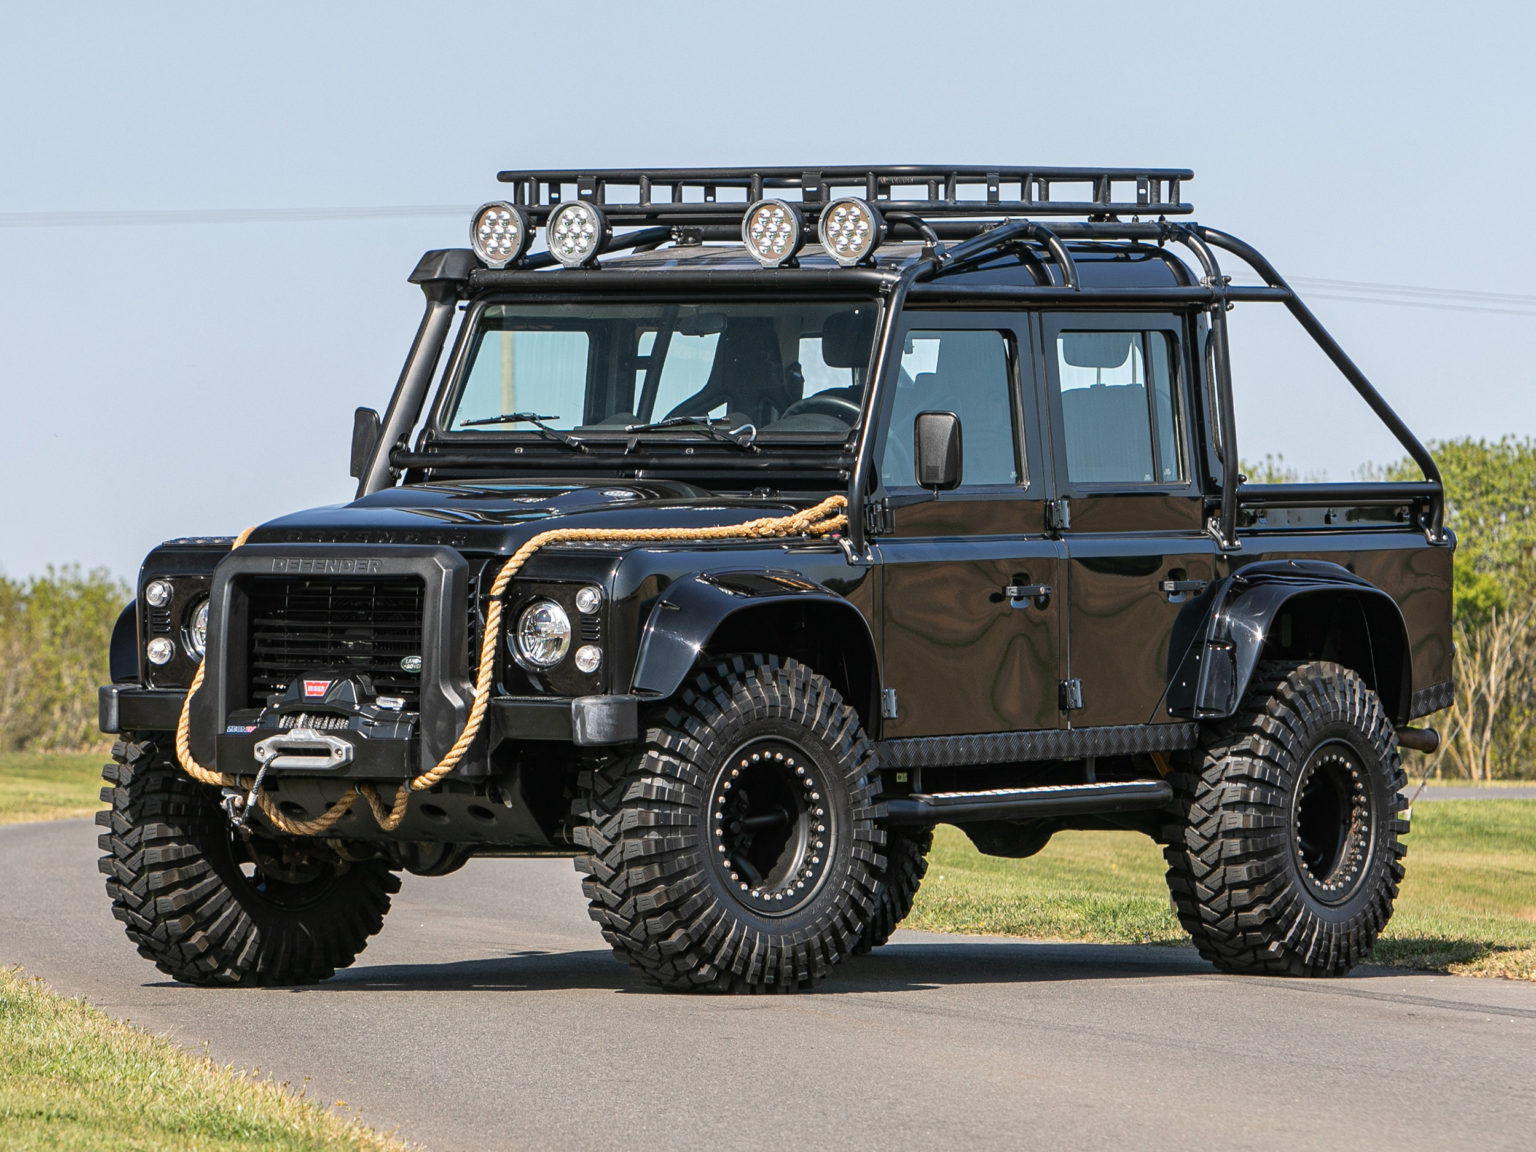 Silverstone Auctions will have this 2015 Land Rover Defender used in the movie "Spectre" cross the block in May.